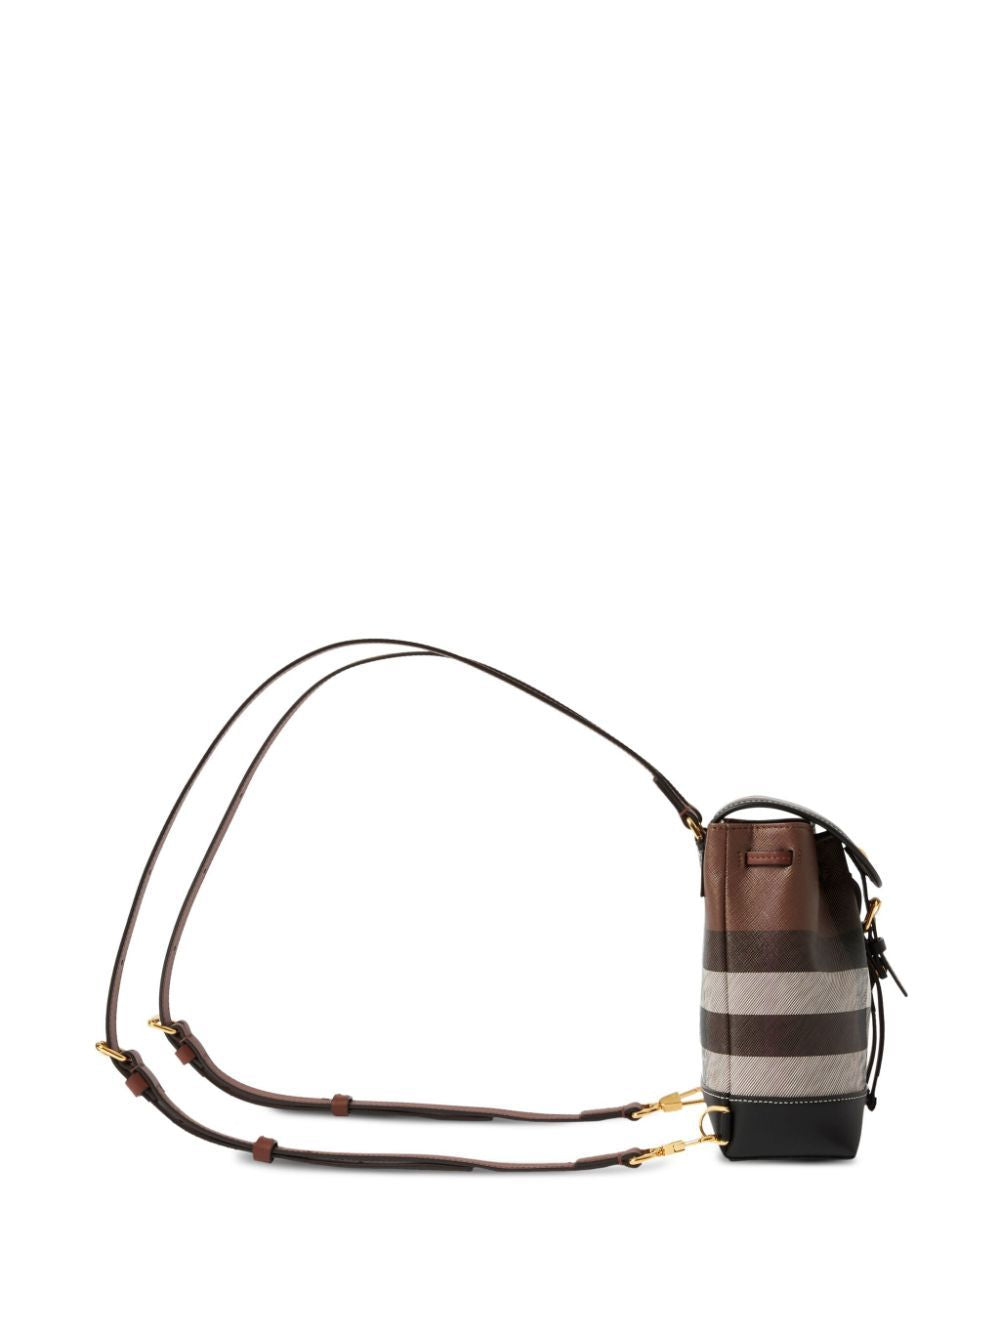 Shop Burberry Brown Check Mini Coated Canvas Backpack For Women